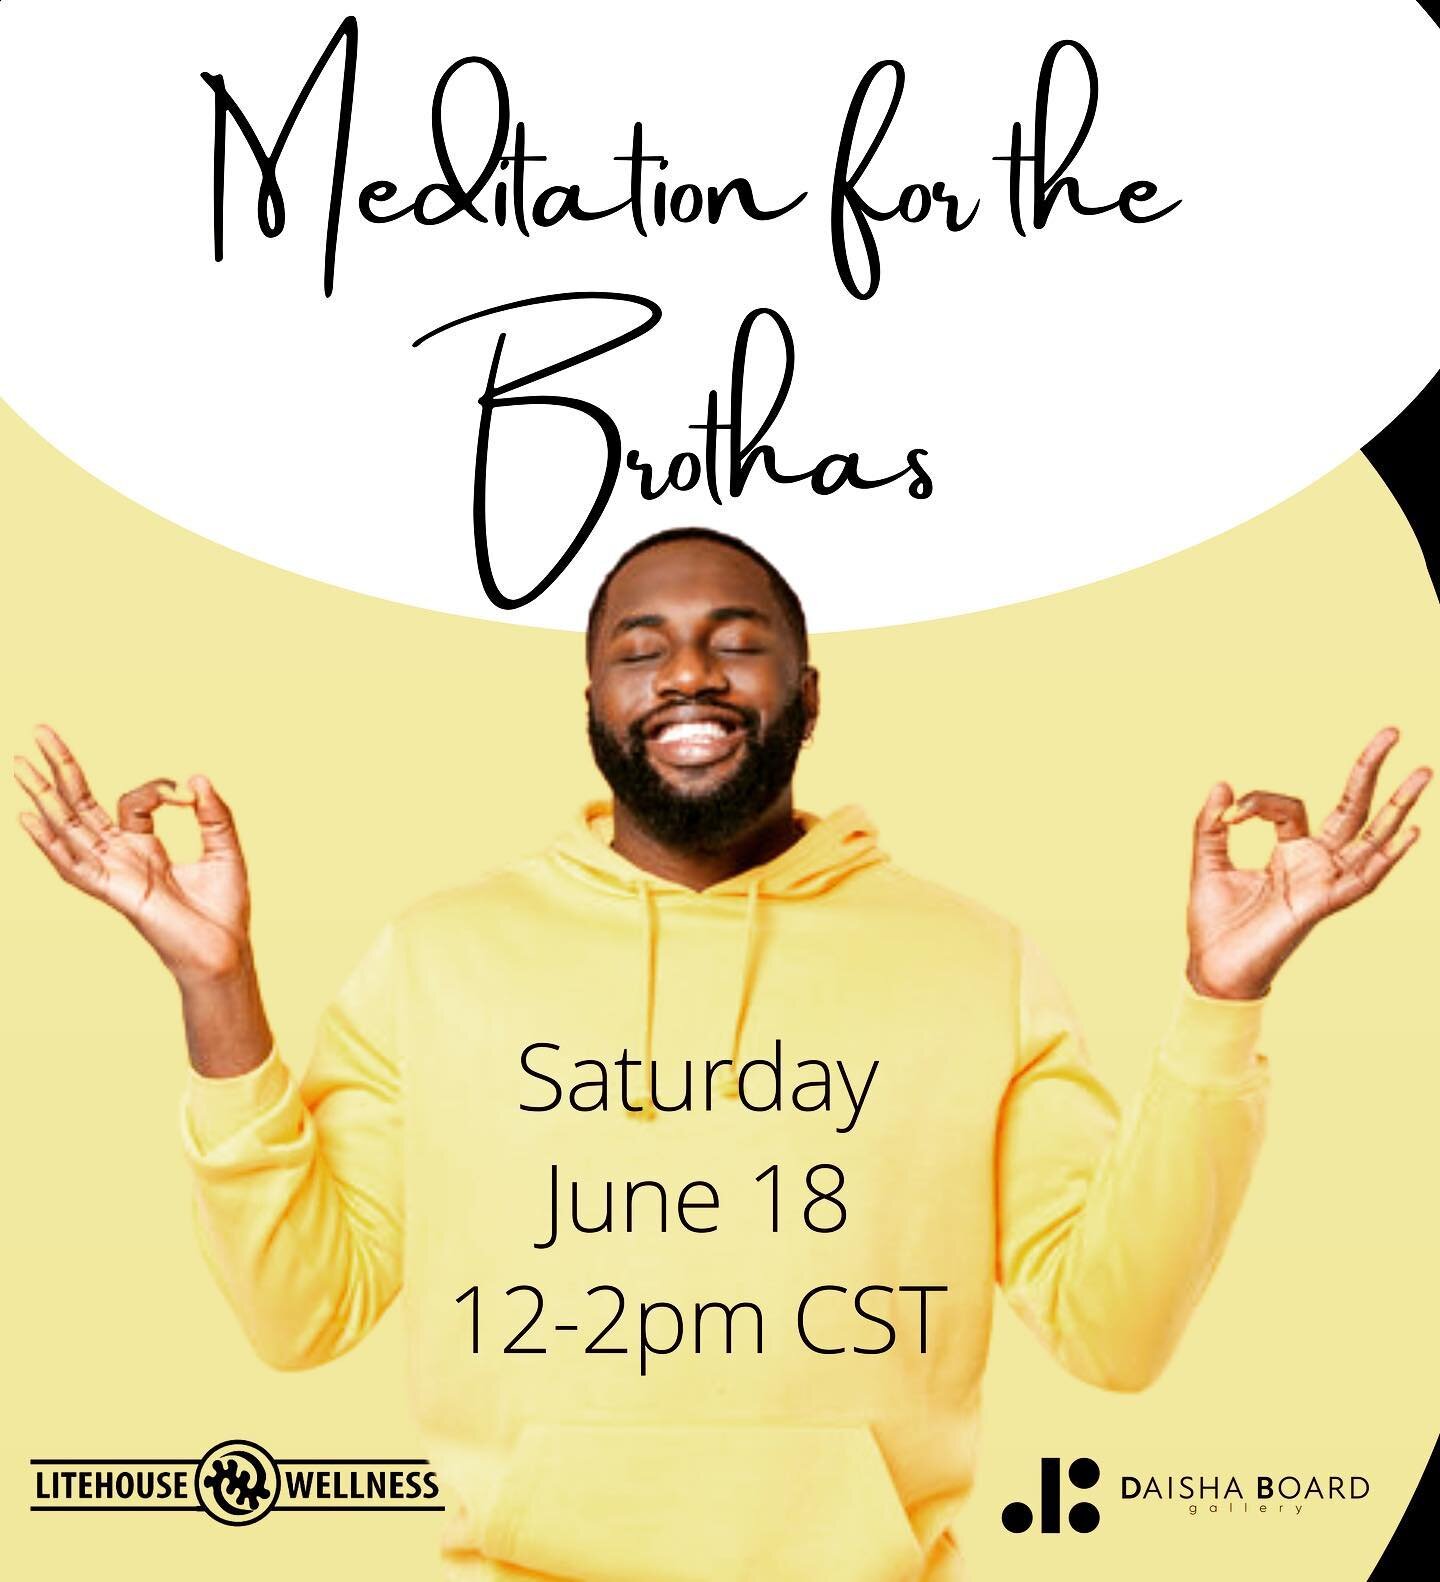 Brotha&rsquo;s, how you feelin&rsquo;? 
Join us Saturday June 18th, 12-2pm CST at the @daishaboardgallery in OakCliff. Cellist @jordanjones_cello and I will guide you on a meditation journey you won&rsquo;t soon forget. Register today, as space is li